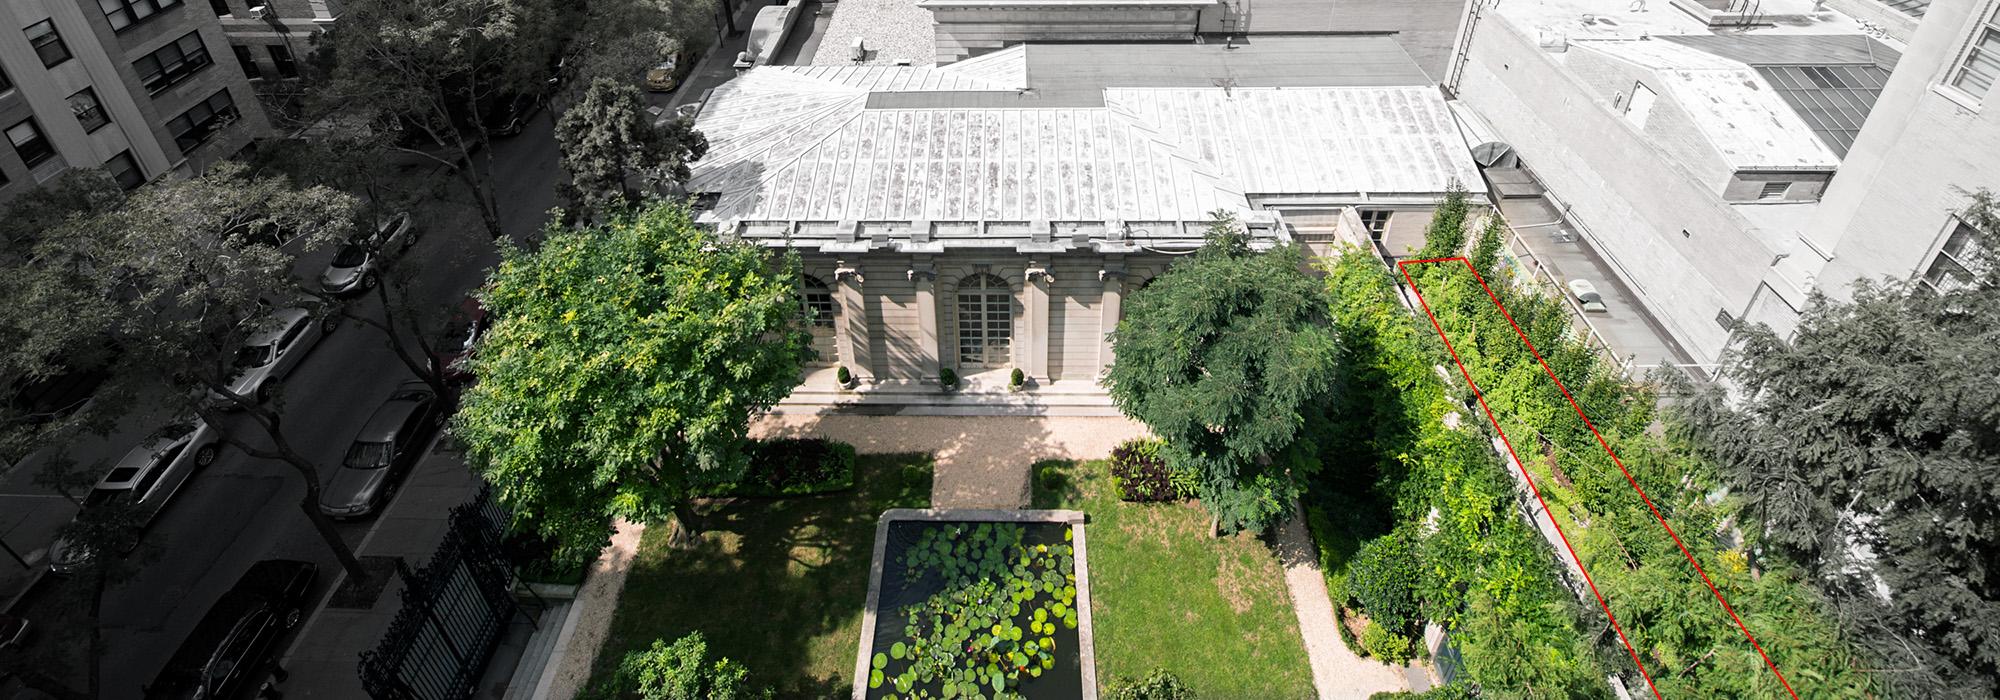 Frick Collection, New York, NY